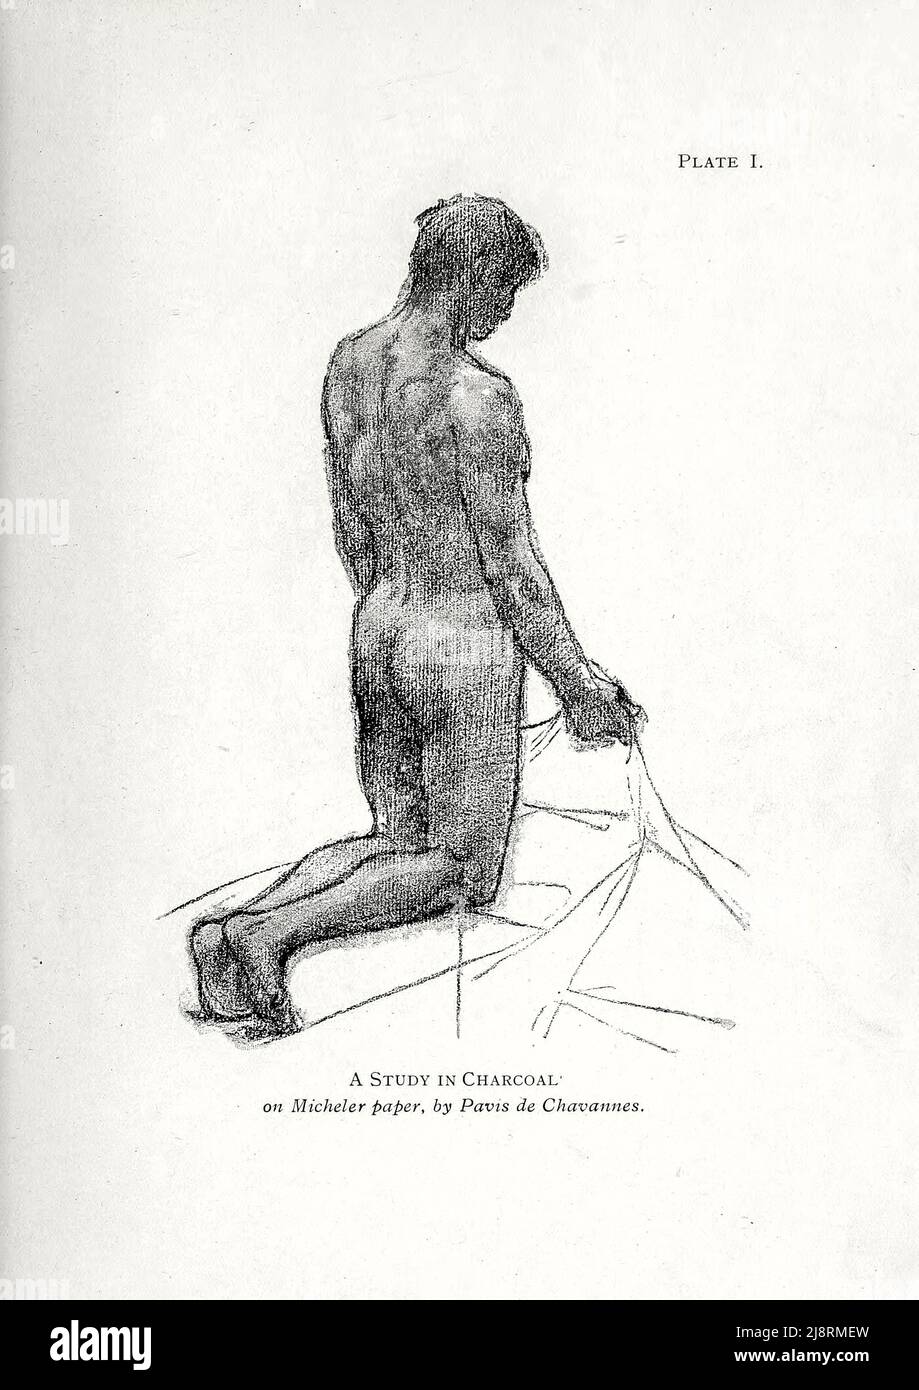 A Study in Charcoal Study of the Male figure from the book ' Studies of the human figure : with some Notes on drawing and Anatomy ' by George Montague Ellwood, and Francis Rowland Yerbury, Erscheinungsdatum 1918 Herausgeber/Verlag London : B.T. Batsford Stockfoto